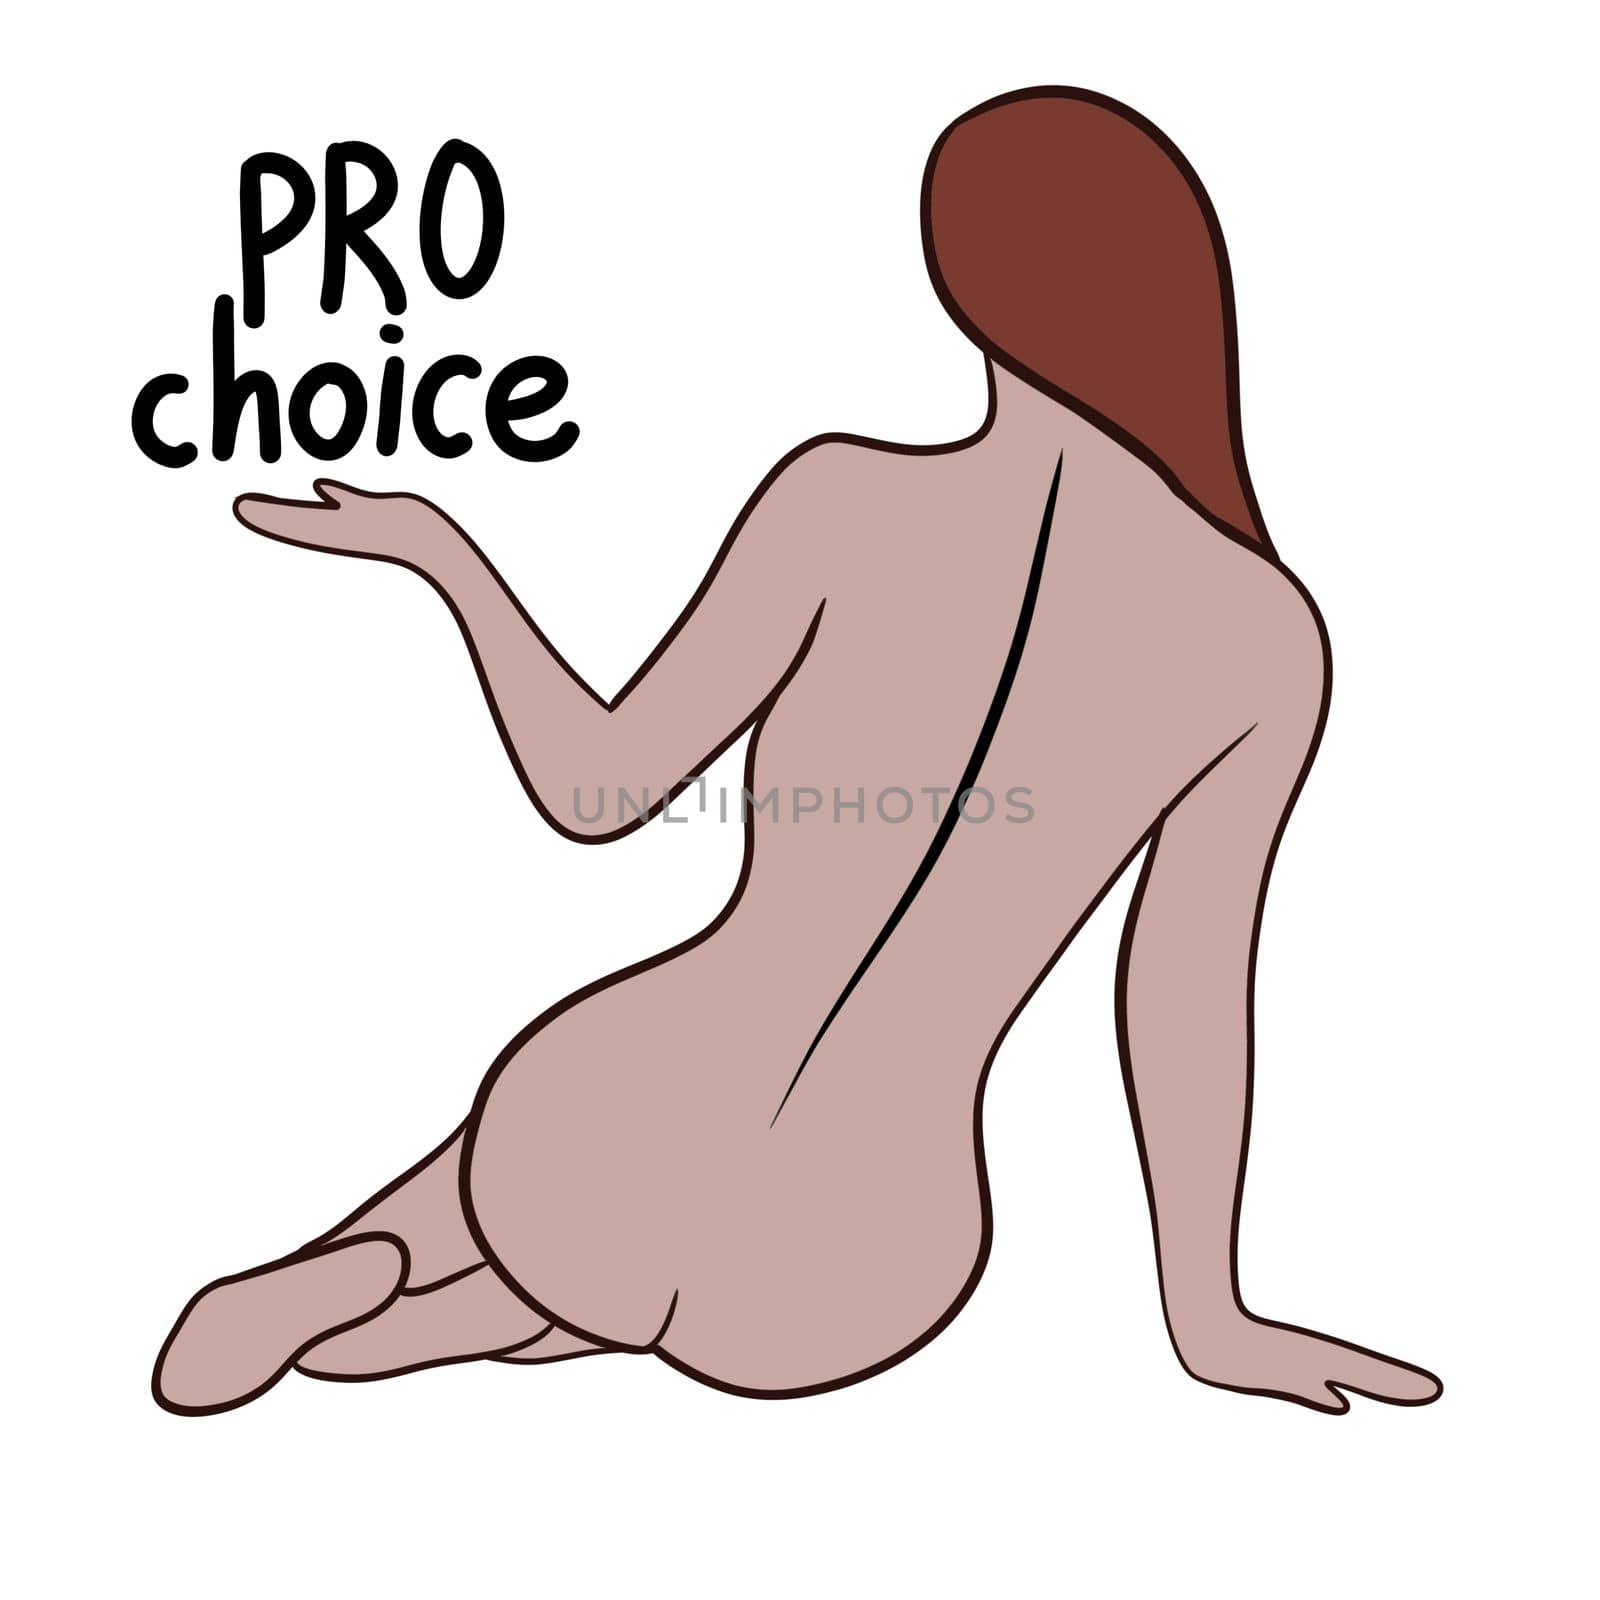 My body my choice hand drawn illustration with woman brown body. Feminism activism concept, reproductive abortion rights, row v wade design. Woman with pro choice words lettering red hair. by Lagmar